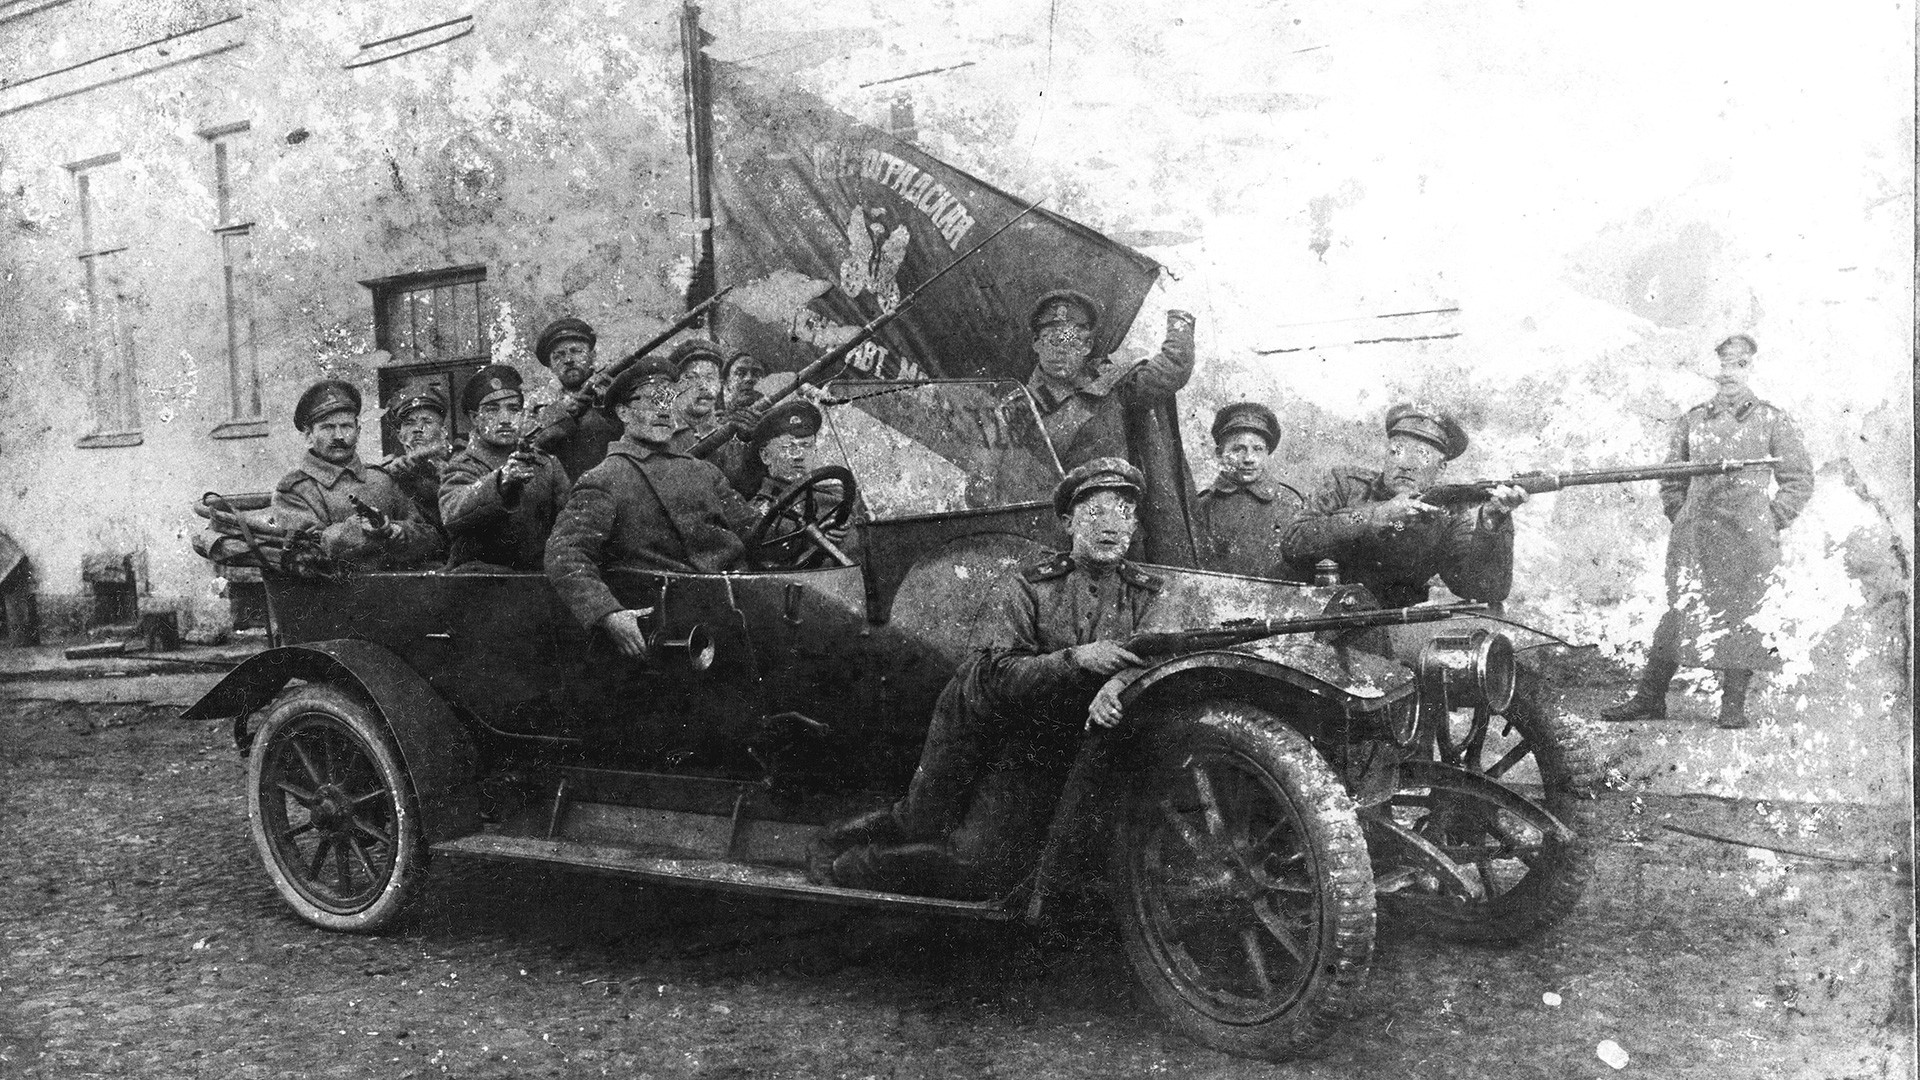 Preparations for the assault of the Winter Palace, October 1917, Petrograd